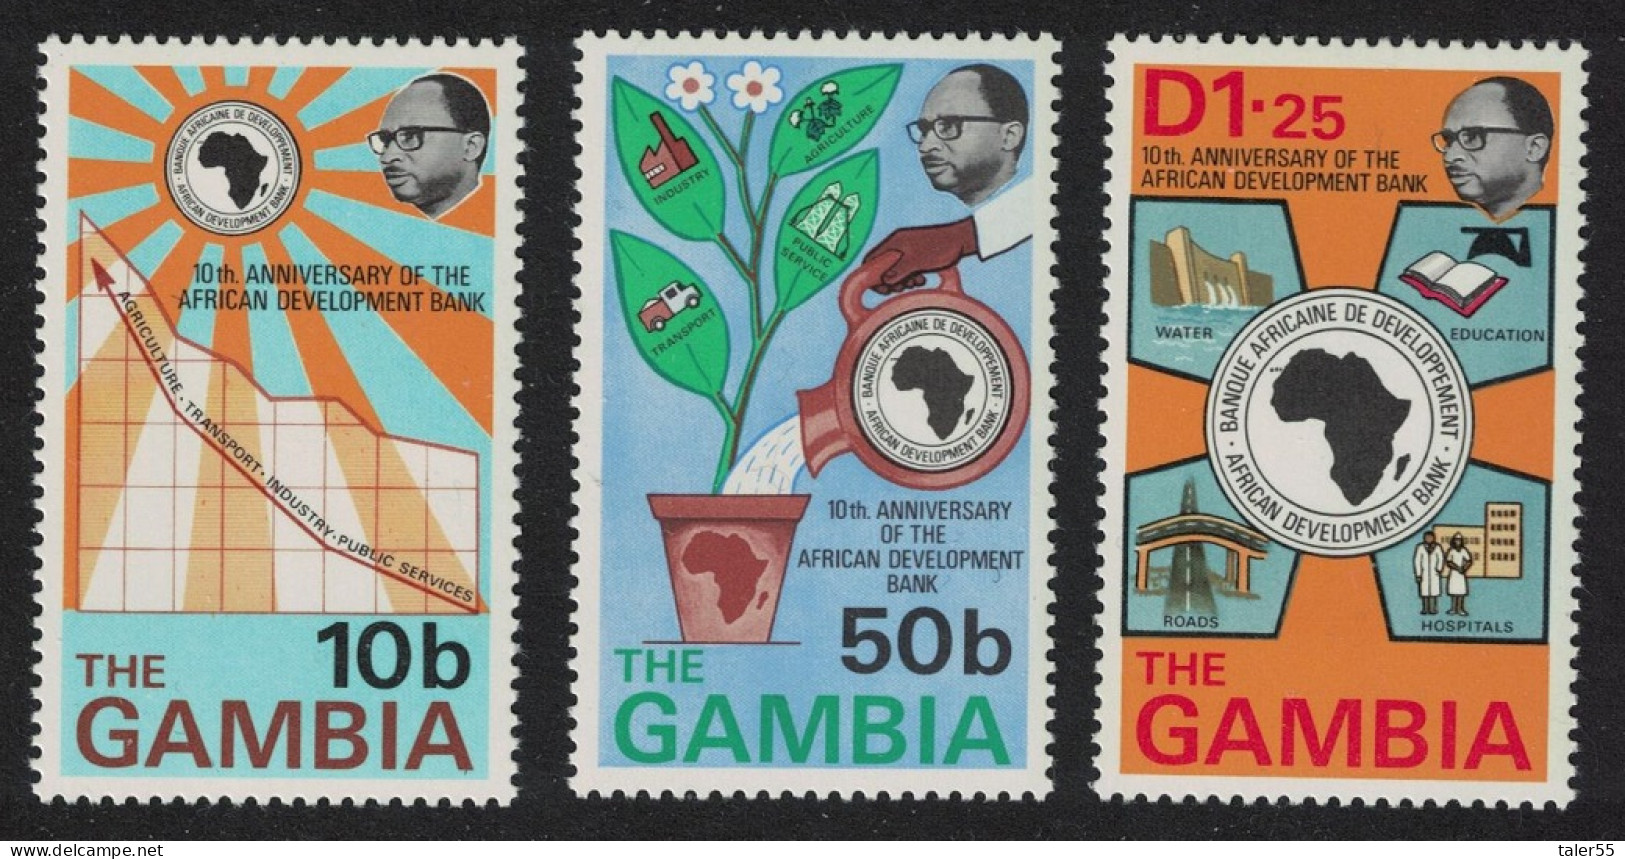 Gambia Tenth Anniversary Of African Development Bank 3v 1975 MNH SG#333-335 - Gambia (1965-...)